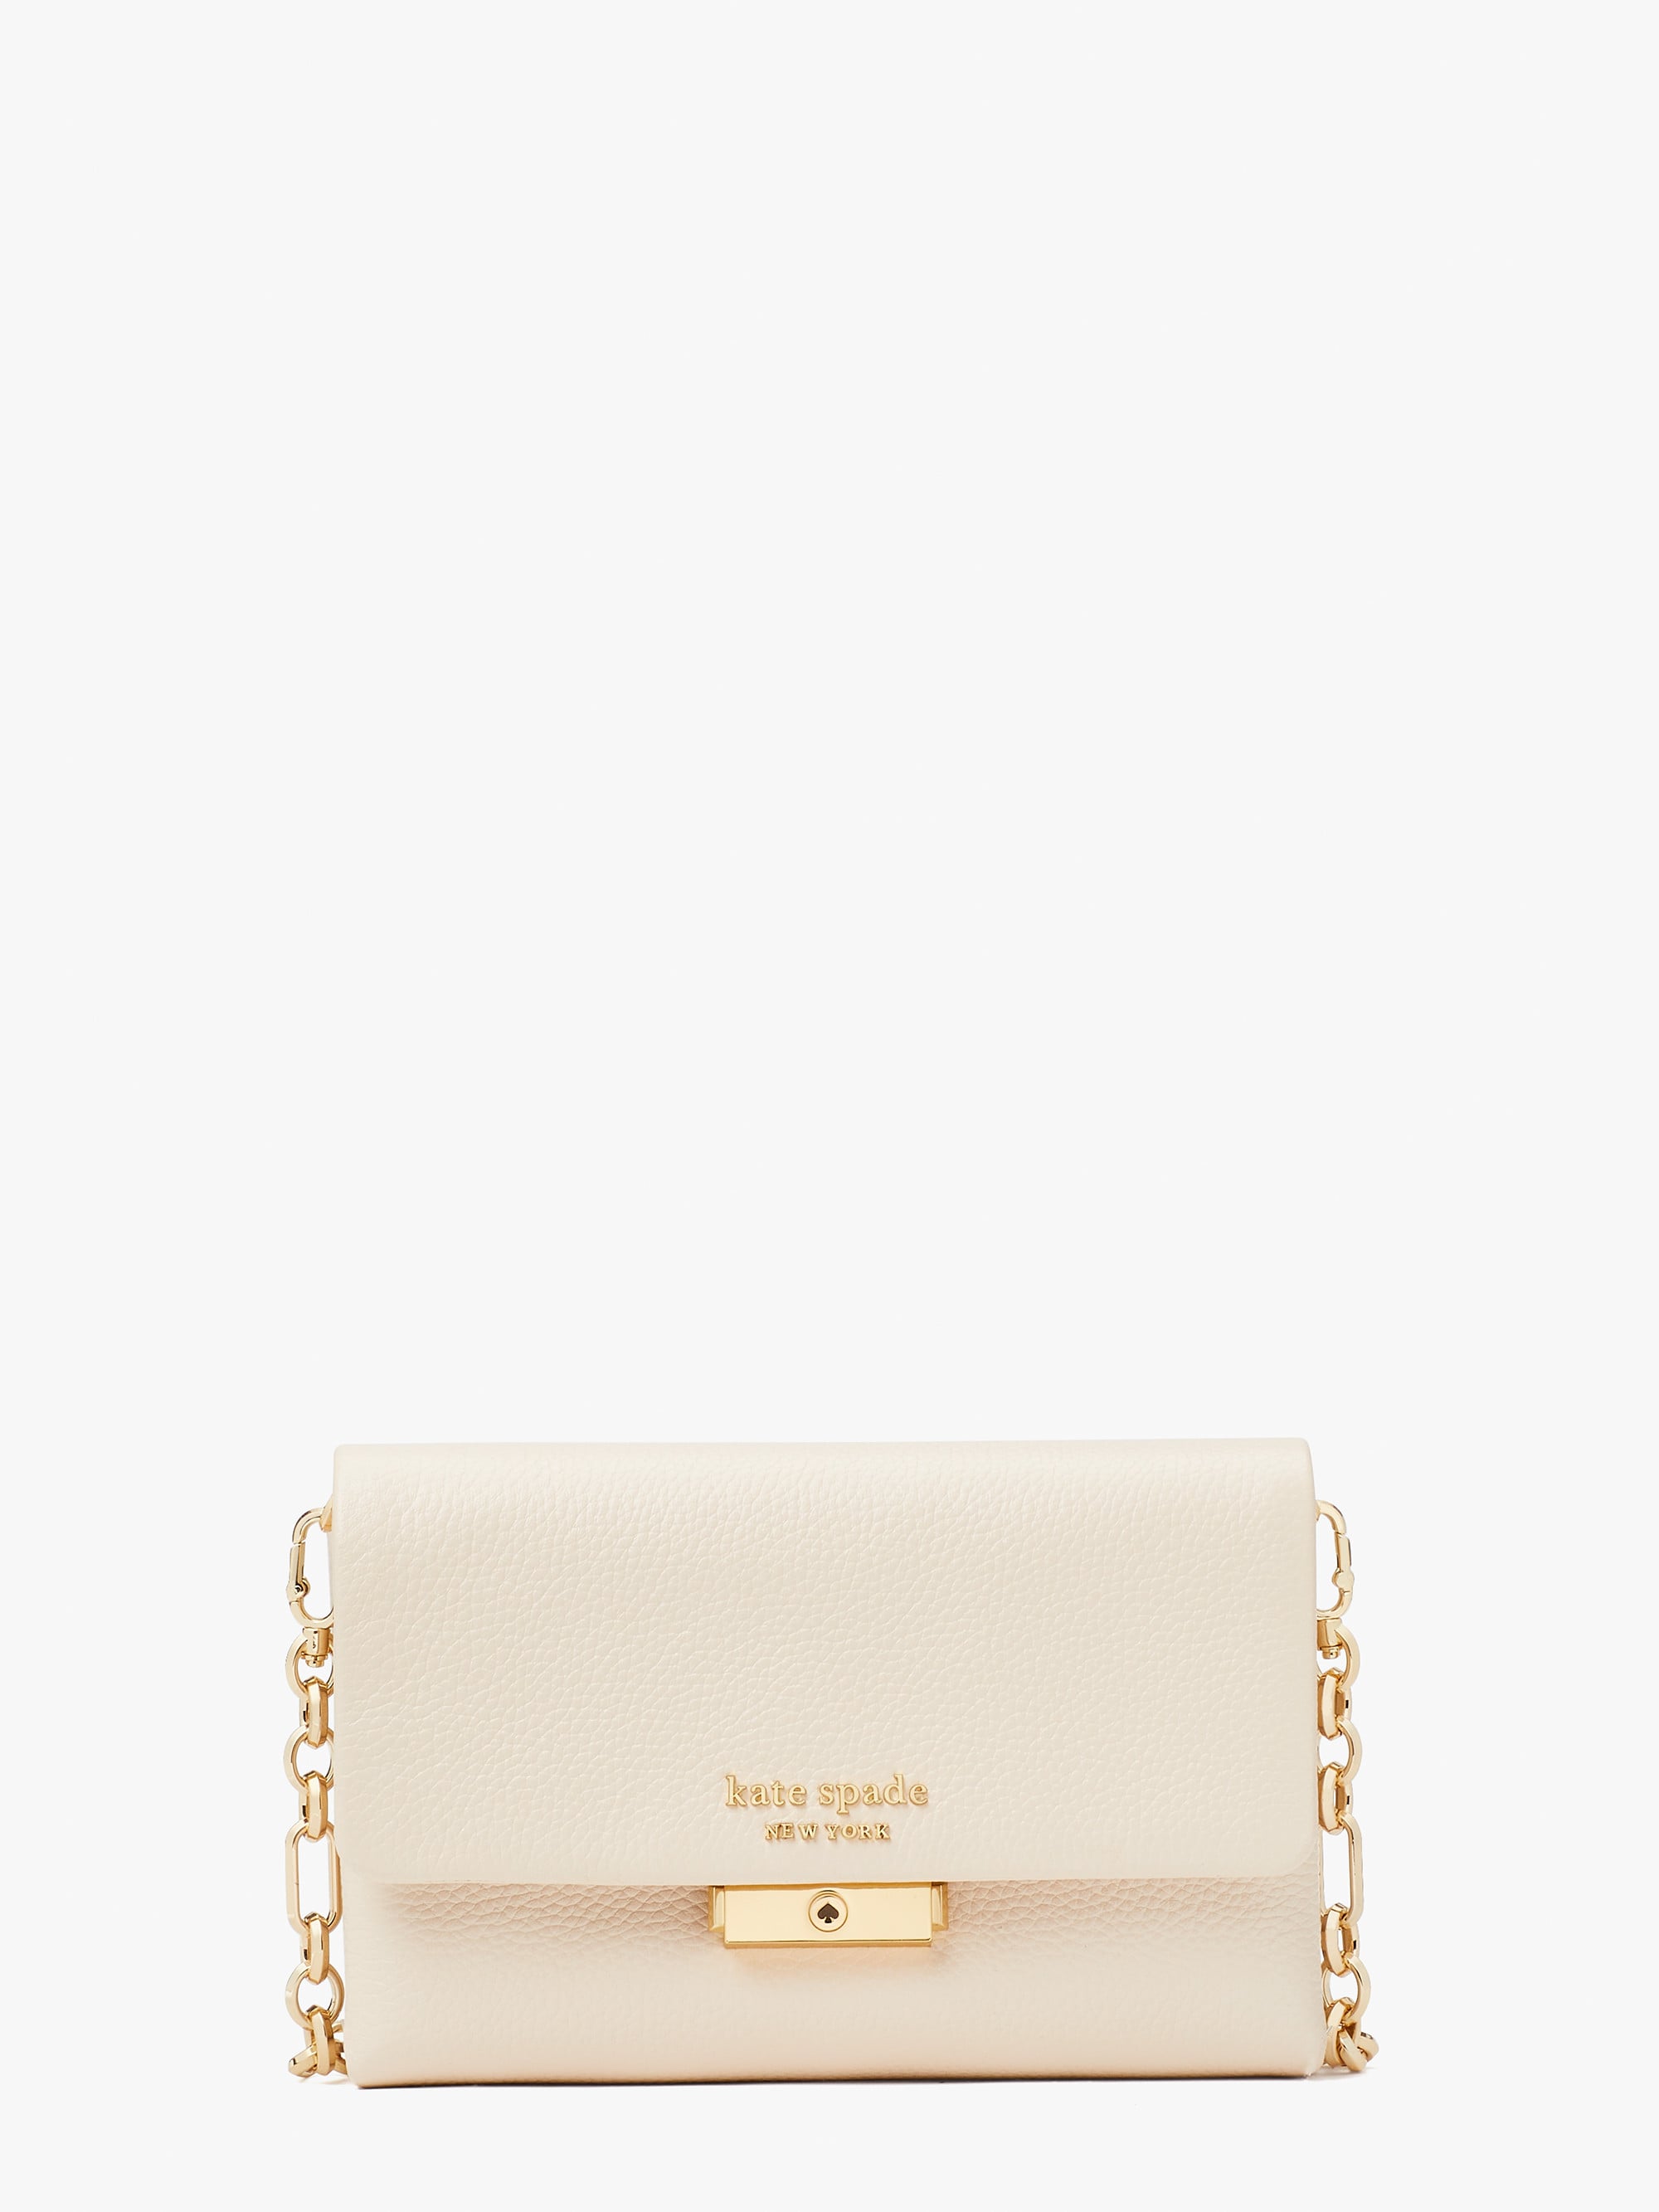 Something Small: Kate Spade New York Carlyle Chain Wallet | The 15  Prettiest Spring Handbags to Shop From Kate Spade's Sale | POPSUGAR Fashion  Photo 8